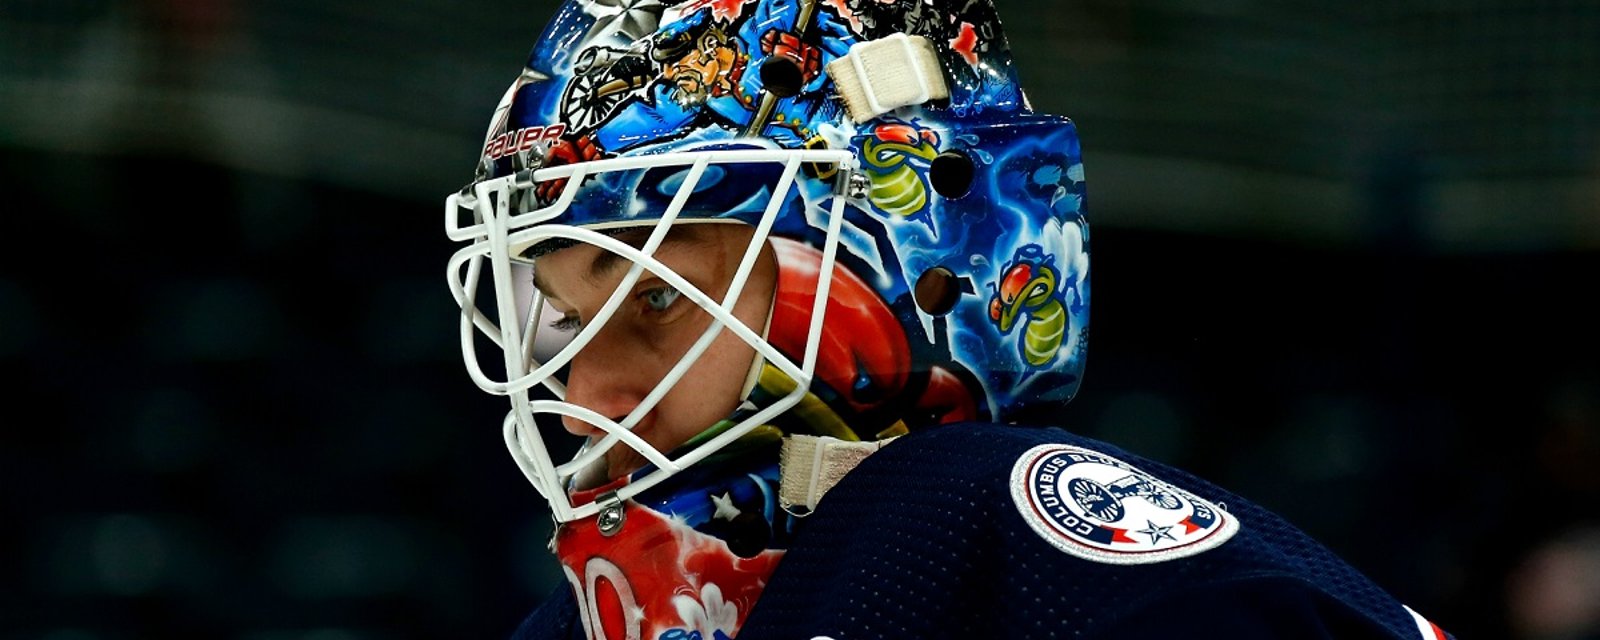 Blue Jackets goalie Elvis Merzlikins out with a significant injury.